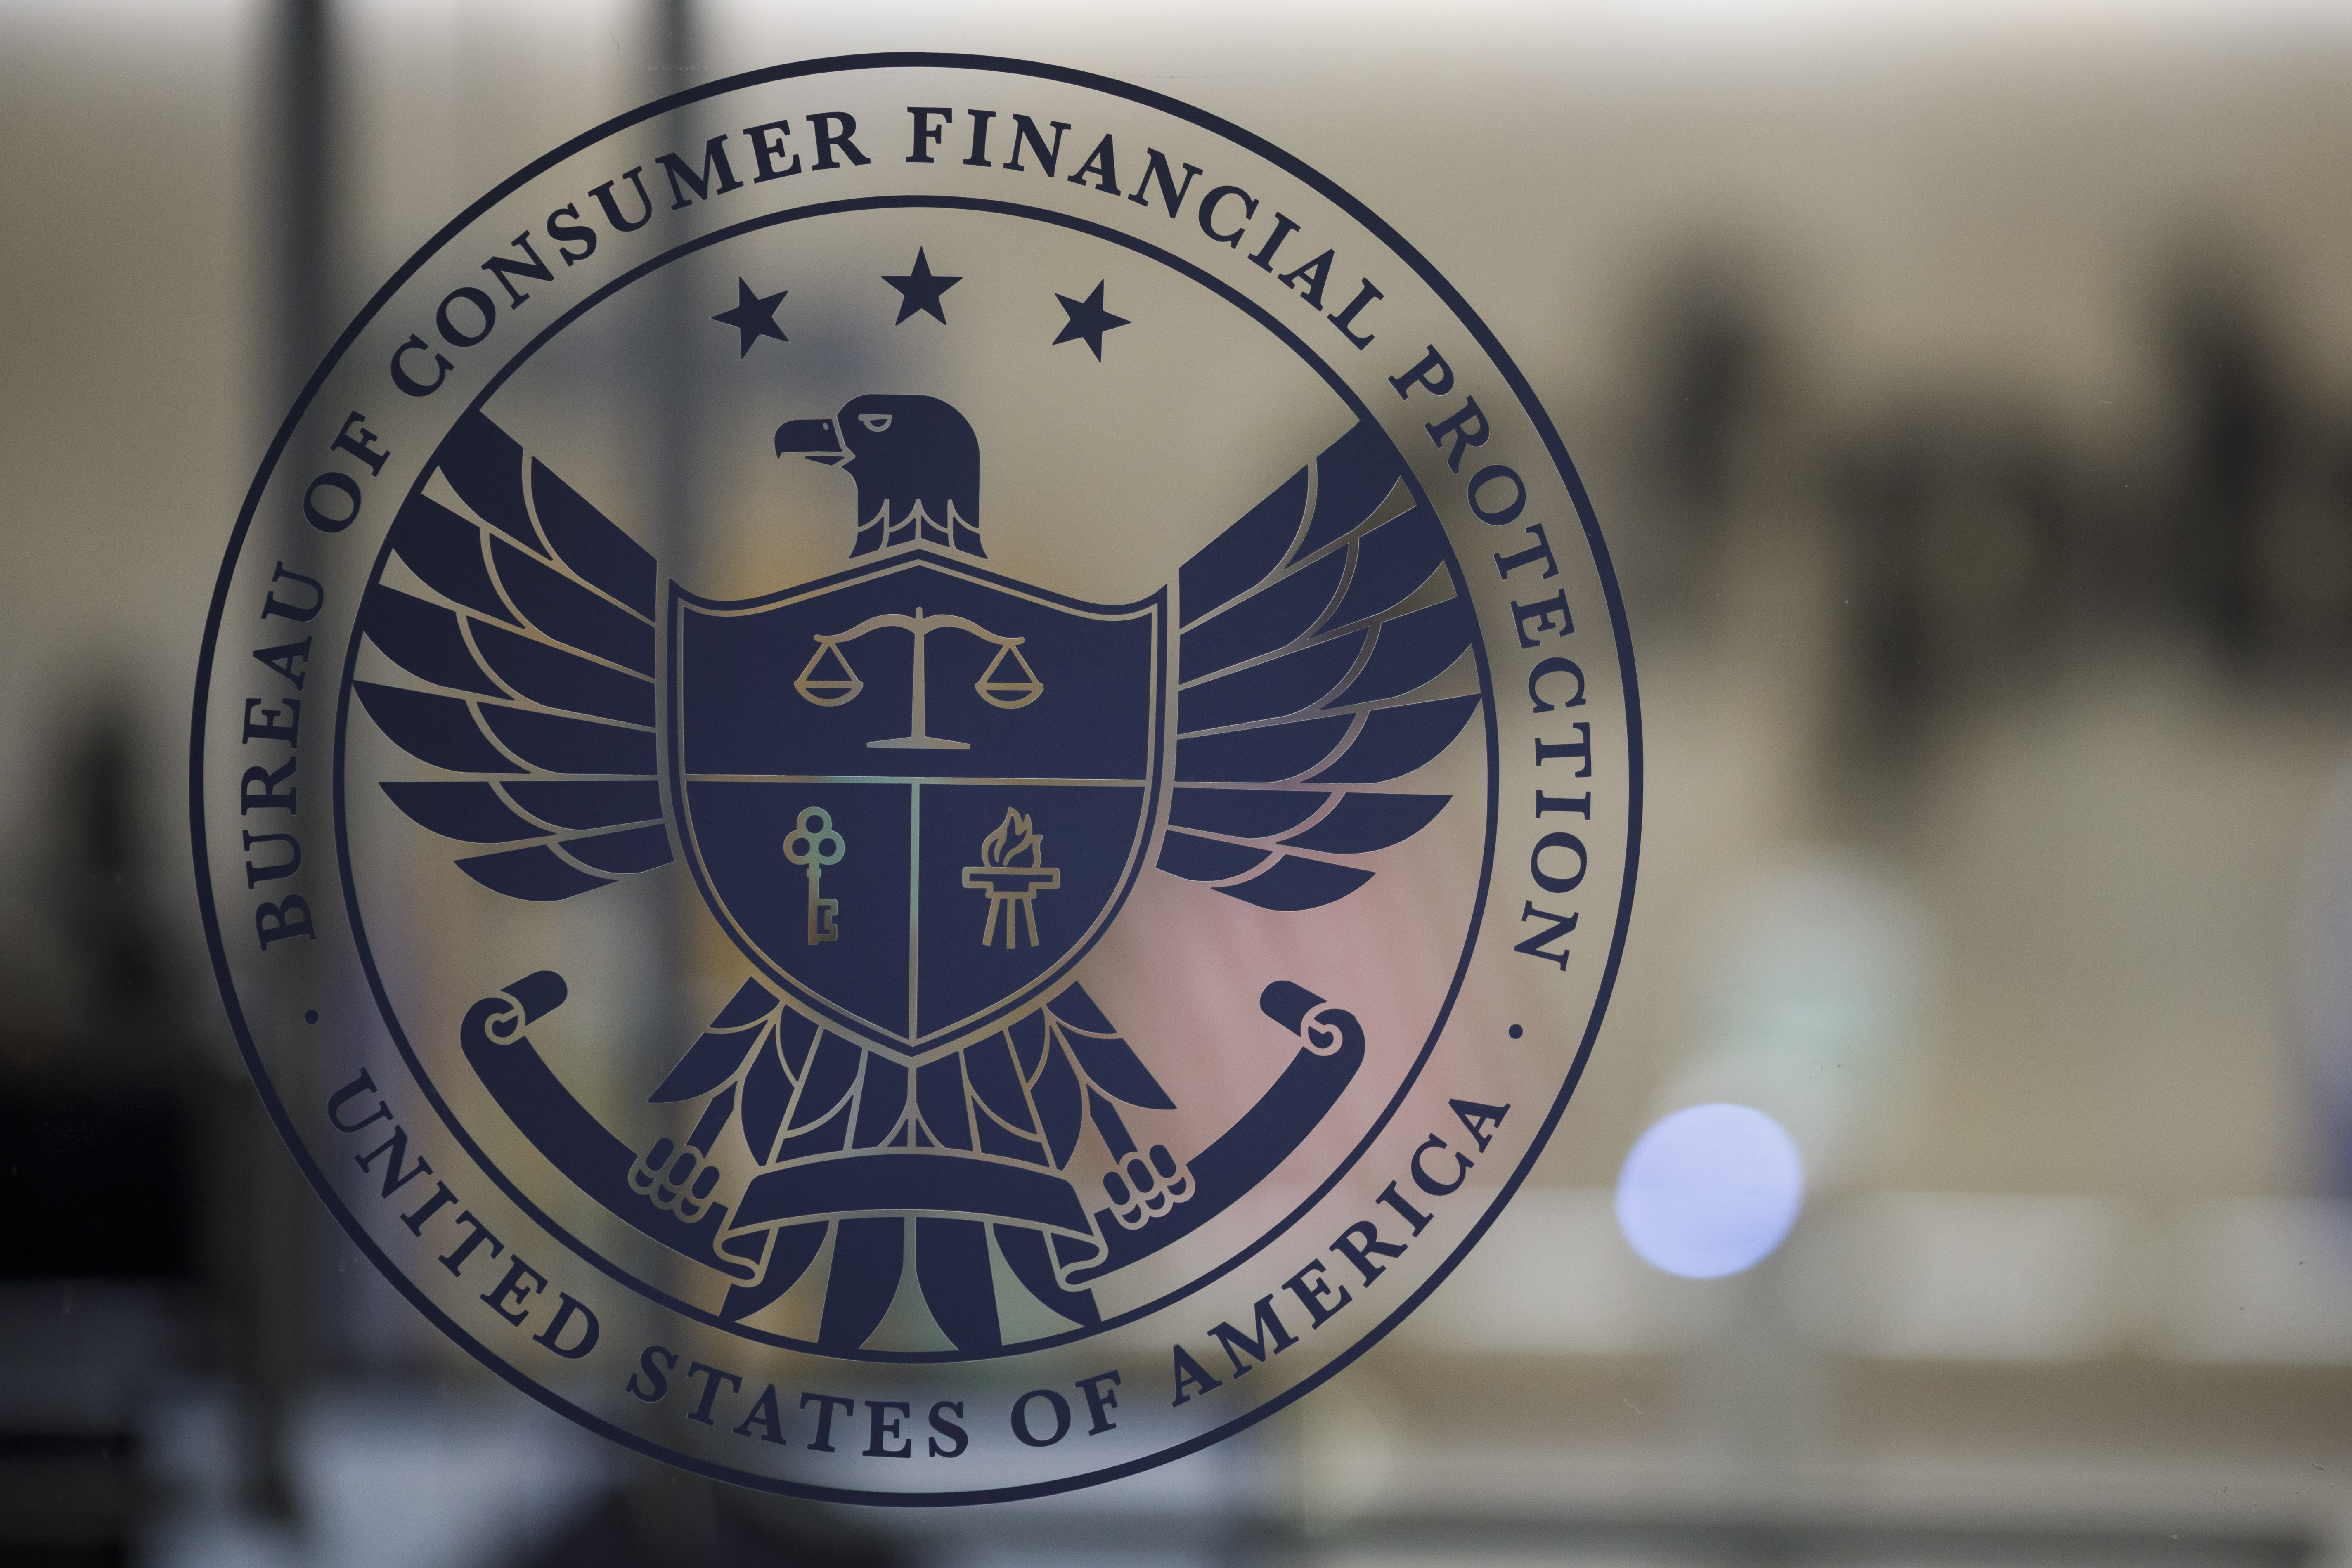 The eagle-shaped logo of the Bureau of Consumer Financial Protection seen on a glass door.